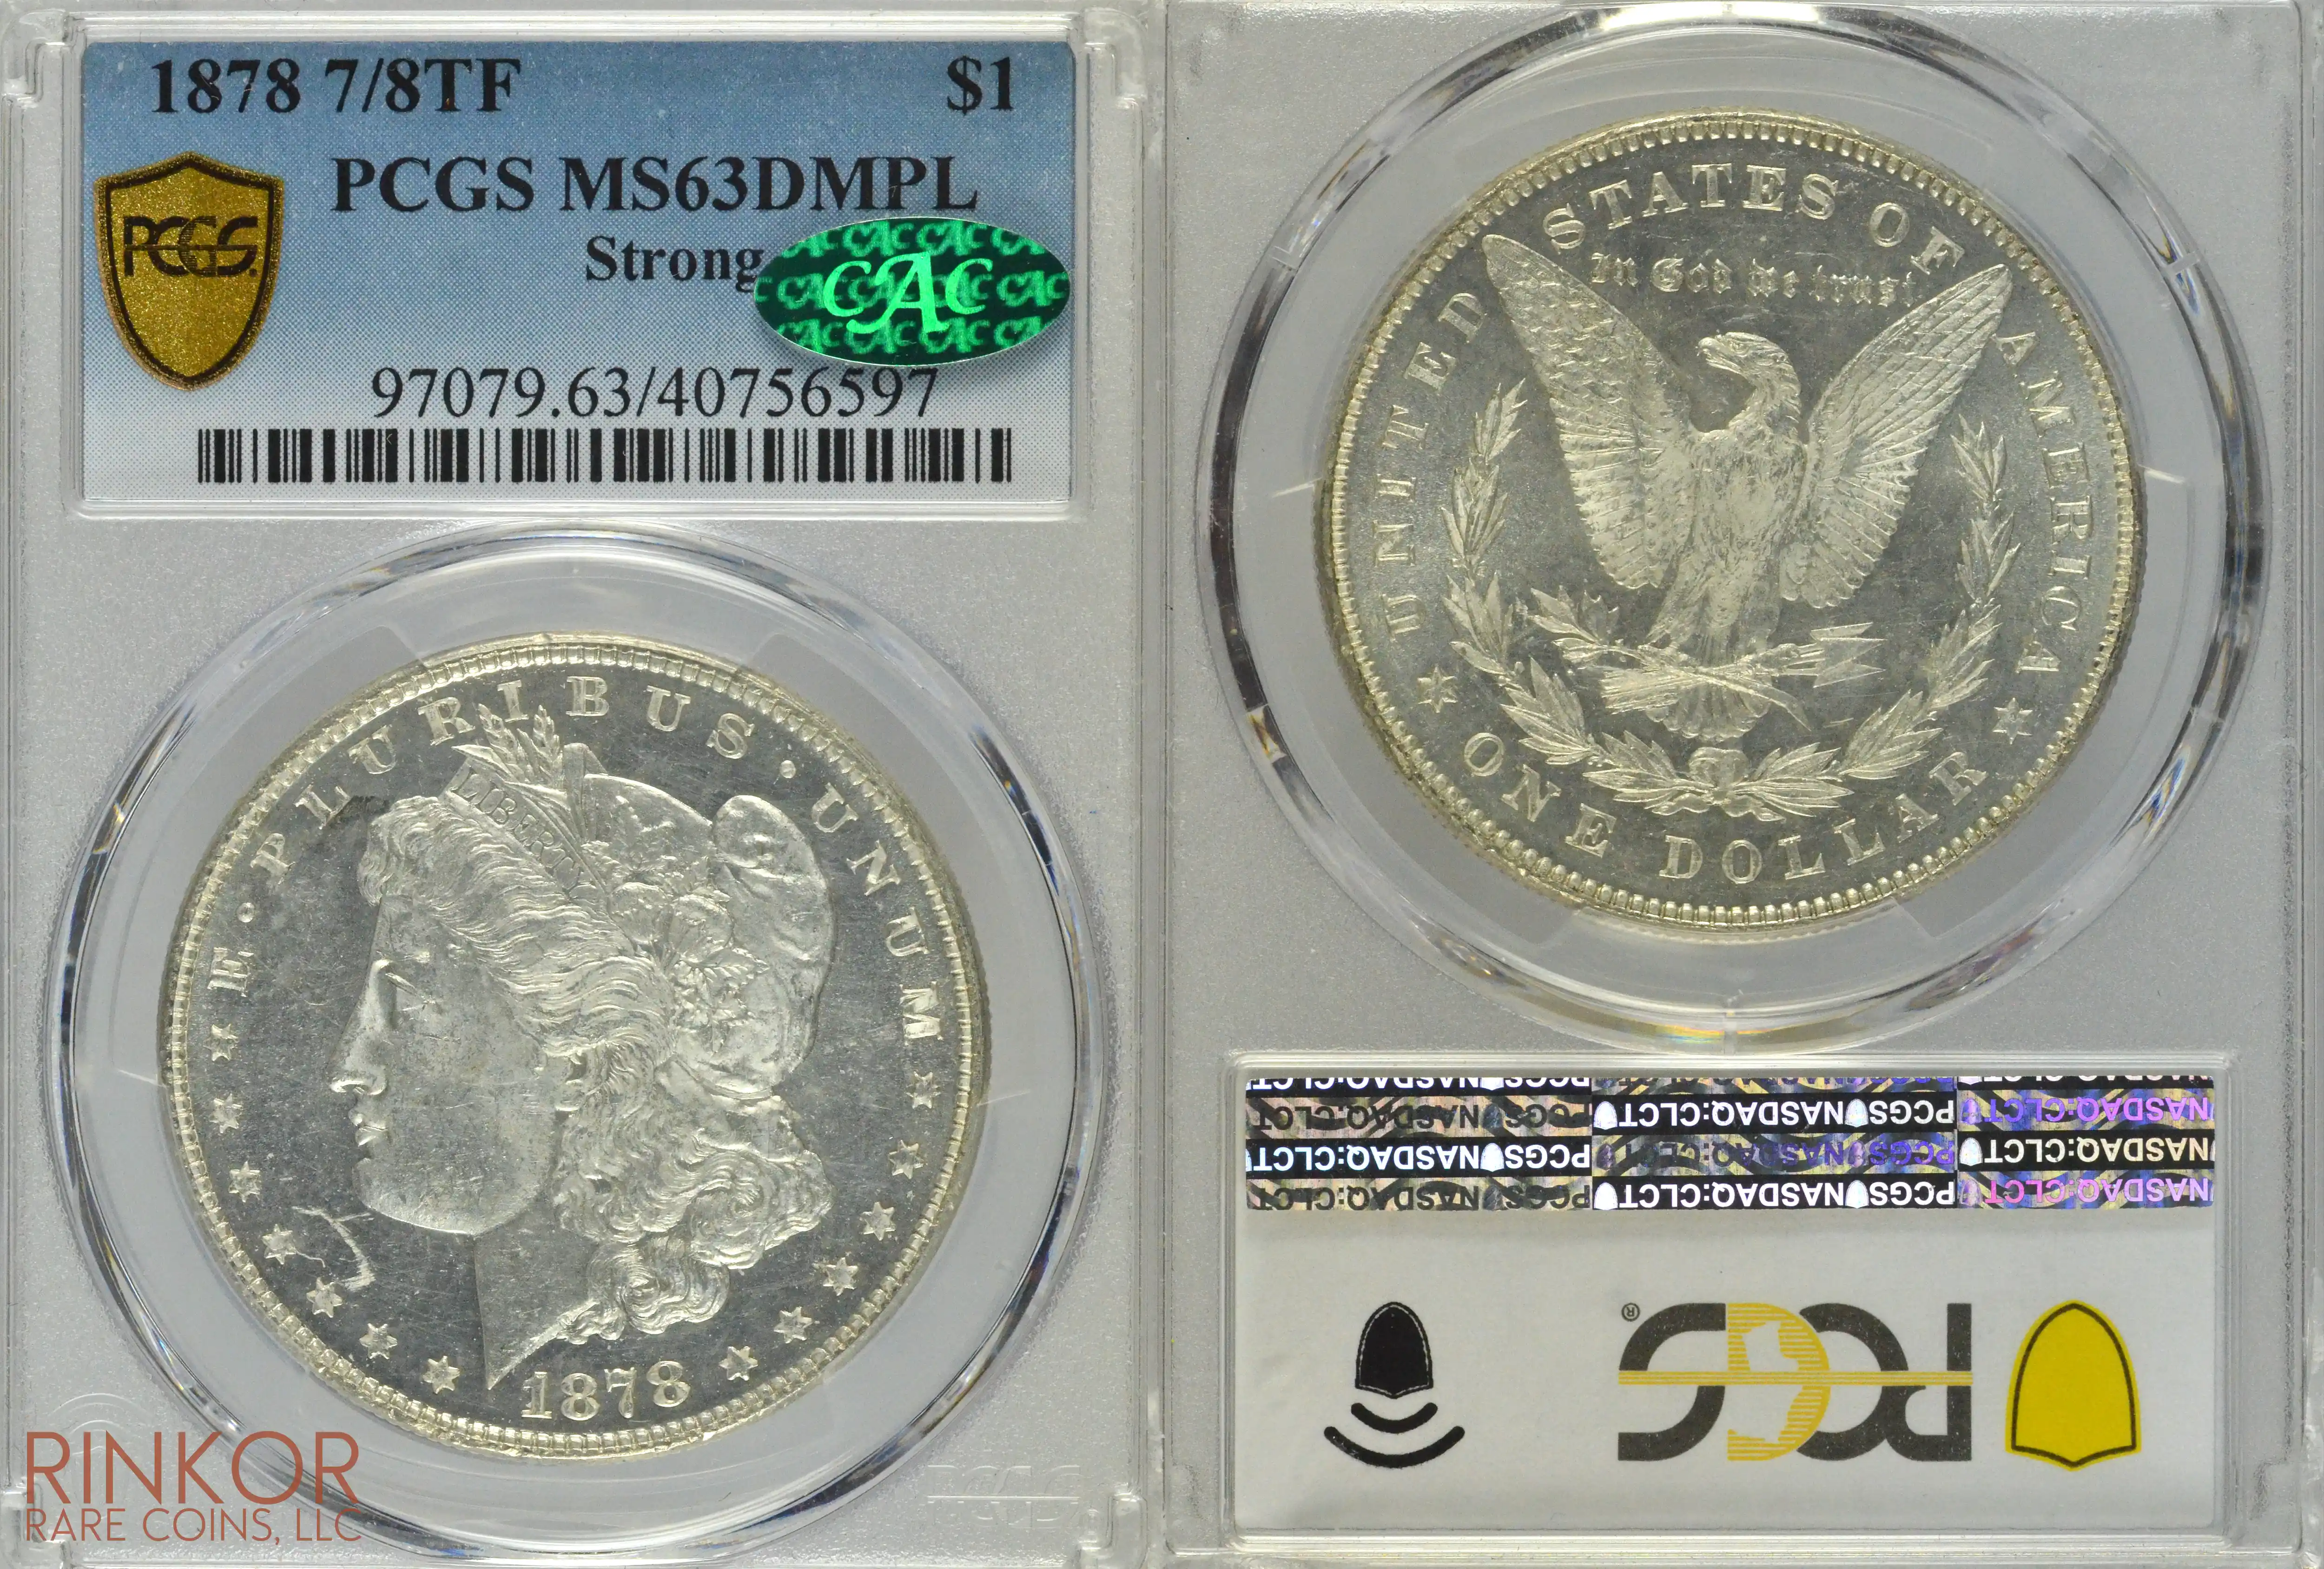 1878 7/8TF $1 Strong PCGS MS 63 DMPL CAC